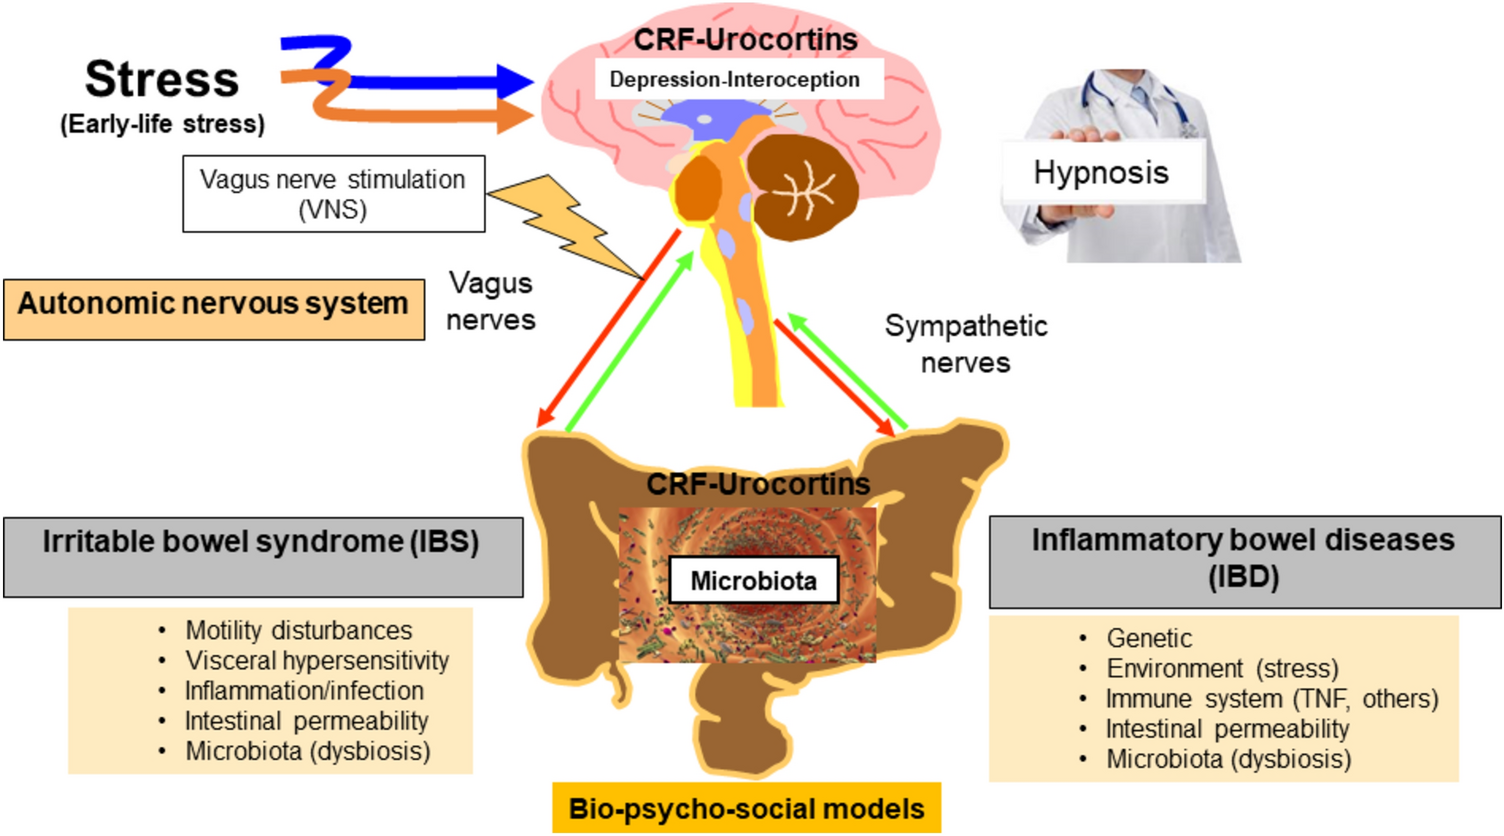 Unmet needs of drugs for irritable bowel syndrome and inflammatory bowel diseases: interest of vagus nerve stimulation and hypnosis